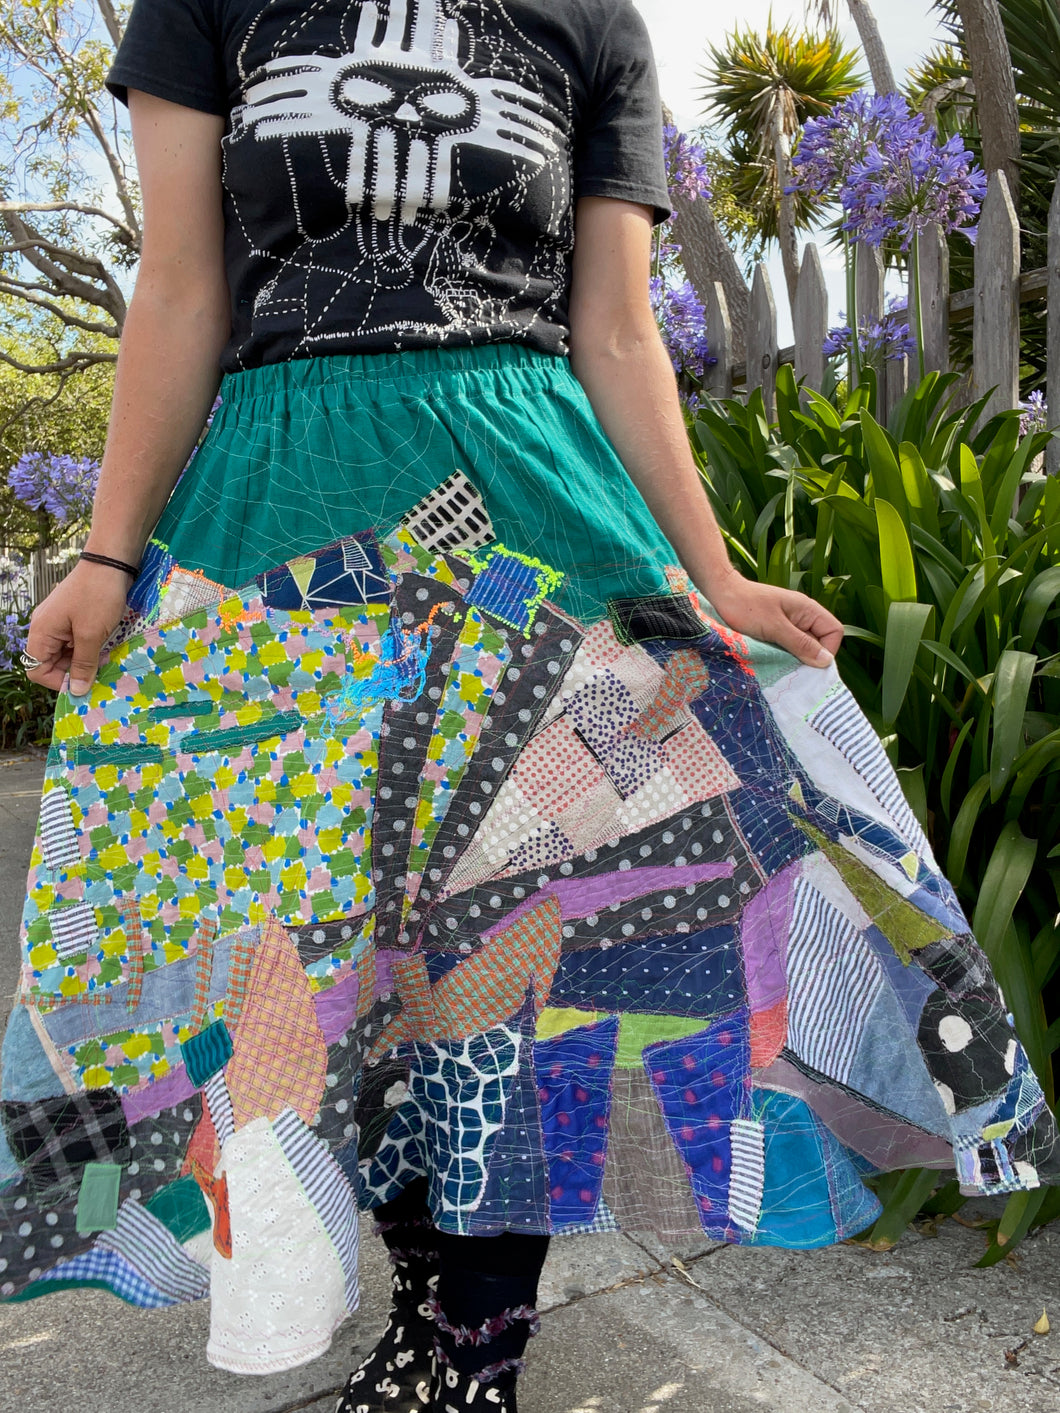 A Canopy of Collage / Bianca Skirt / one-of-a-kind / hand-embroidered & collaged / waist size 28